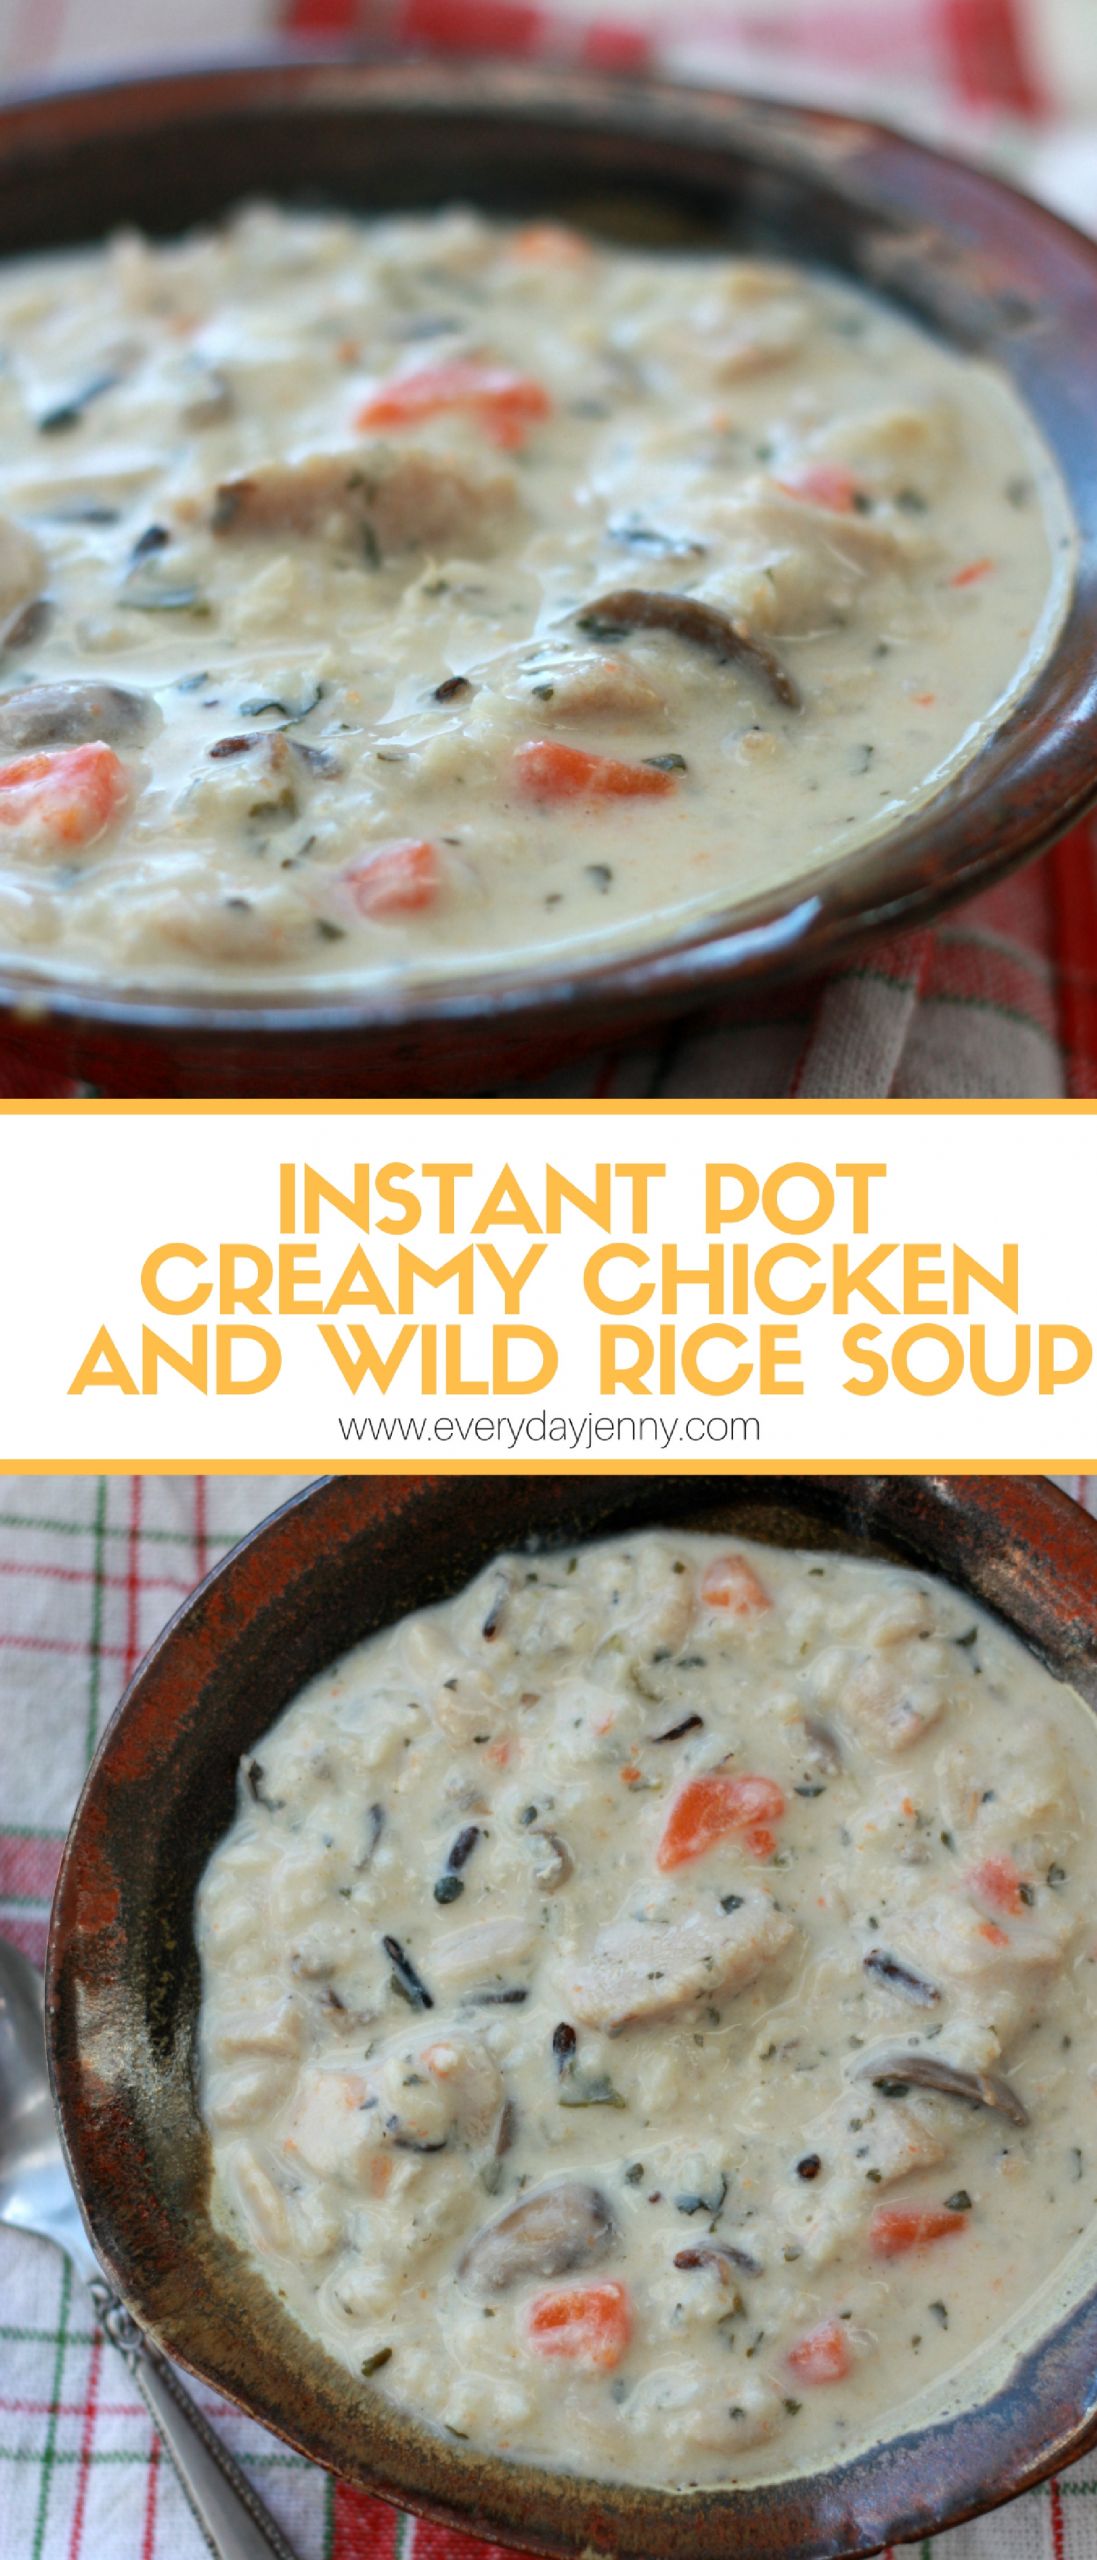 Instant Pot Wild Rice Soup
 INSTANT POT CREAMY CHICKEN AND WILD RICE SOUP